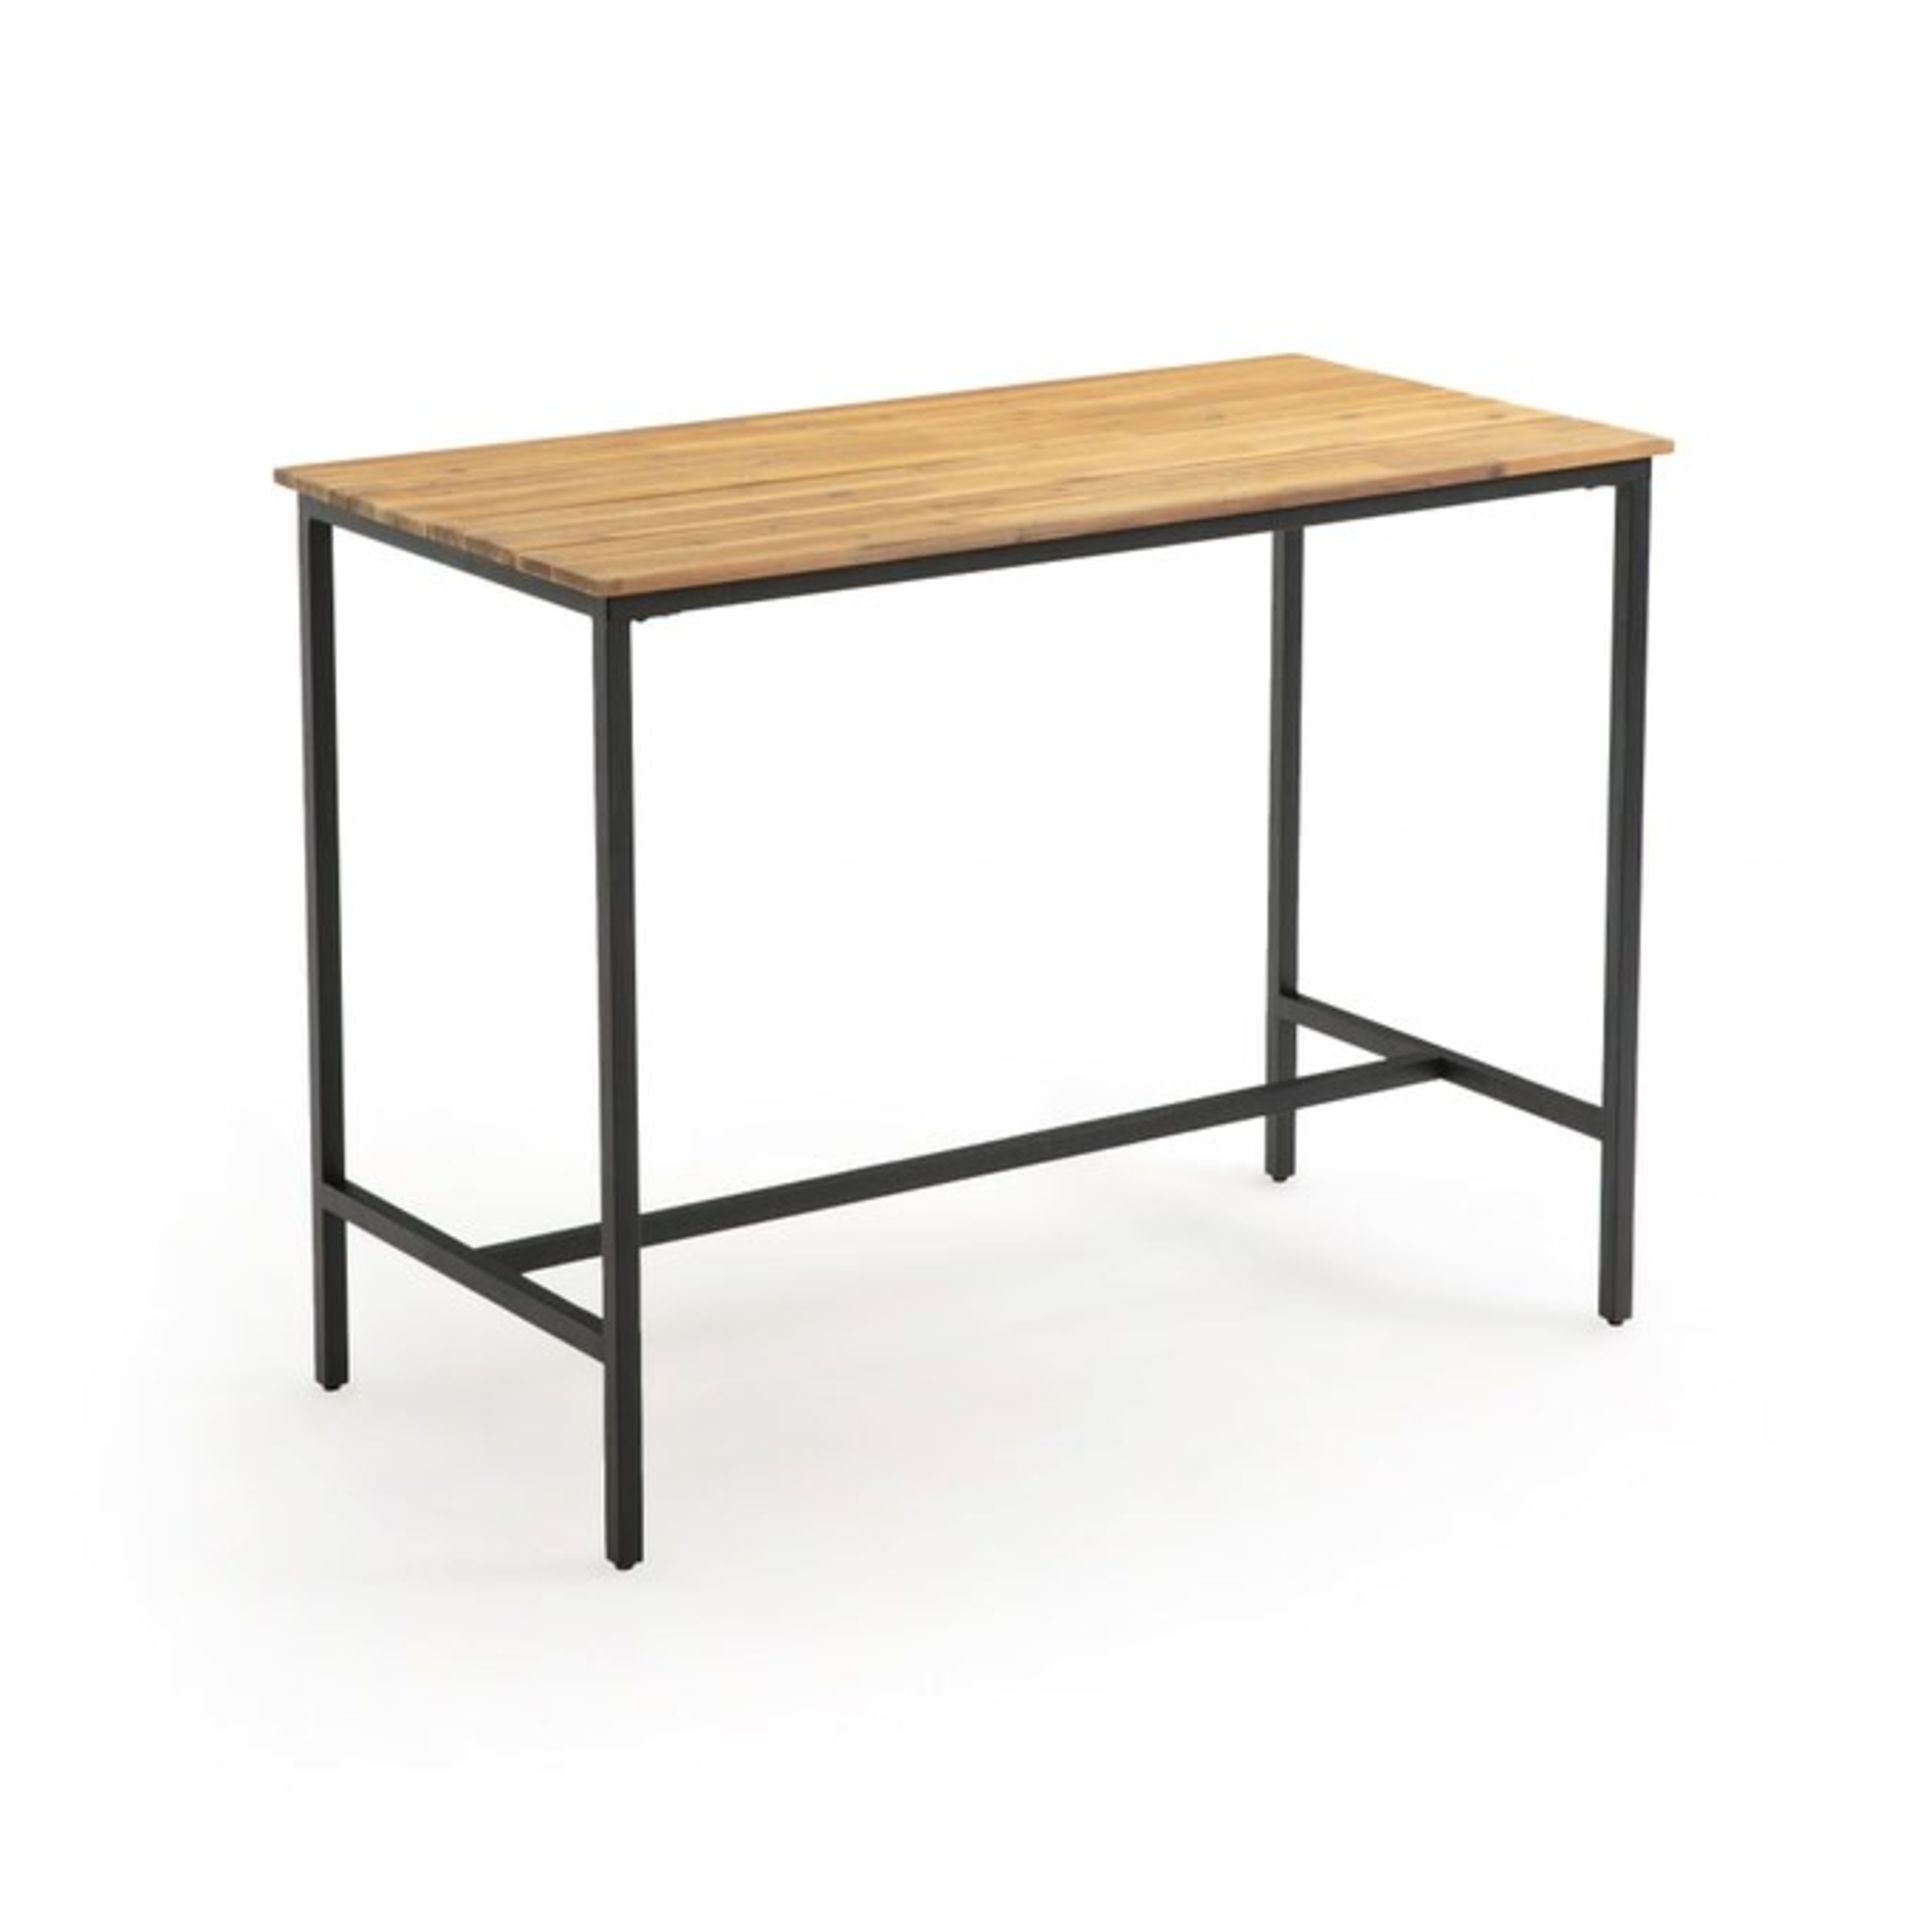 1 GRADE B BOXED DESIGNER METAL GARDEN TABLE IN BLACK / RRP £150.00 (PUBLIC VIEWING AVAILABLE)